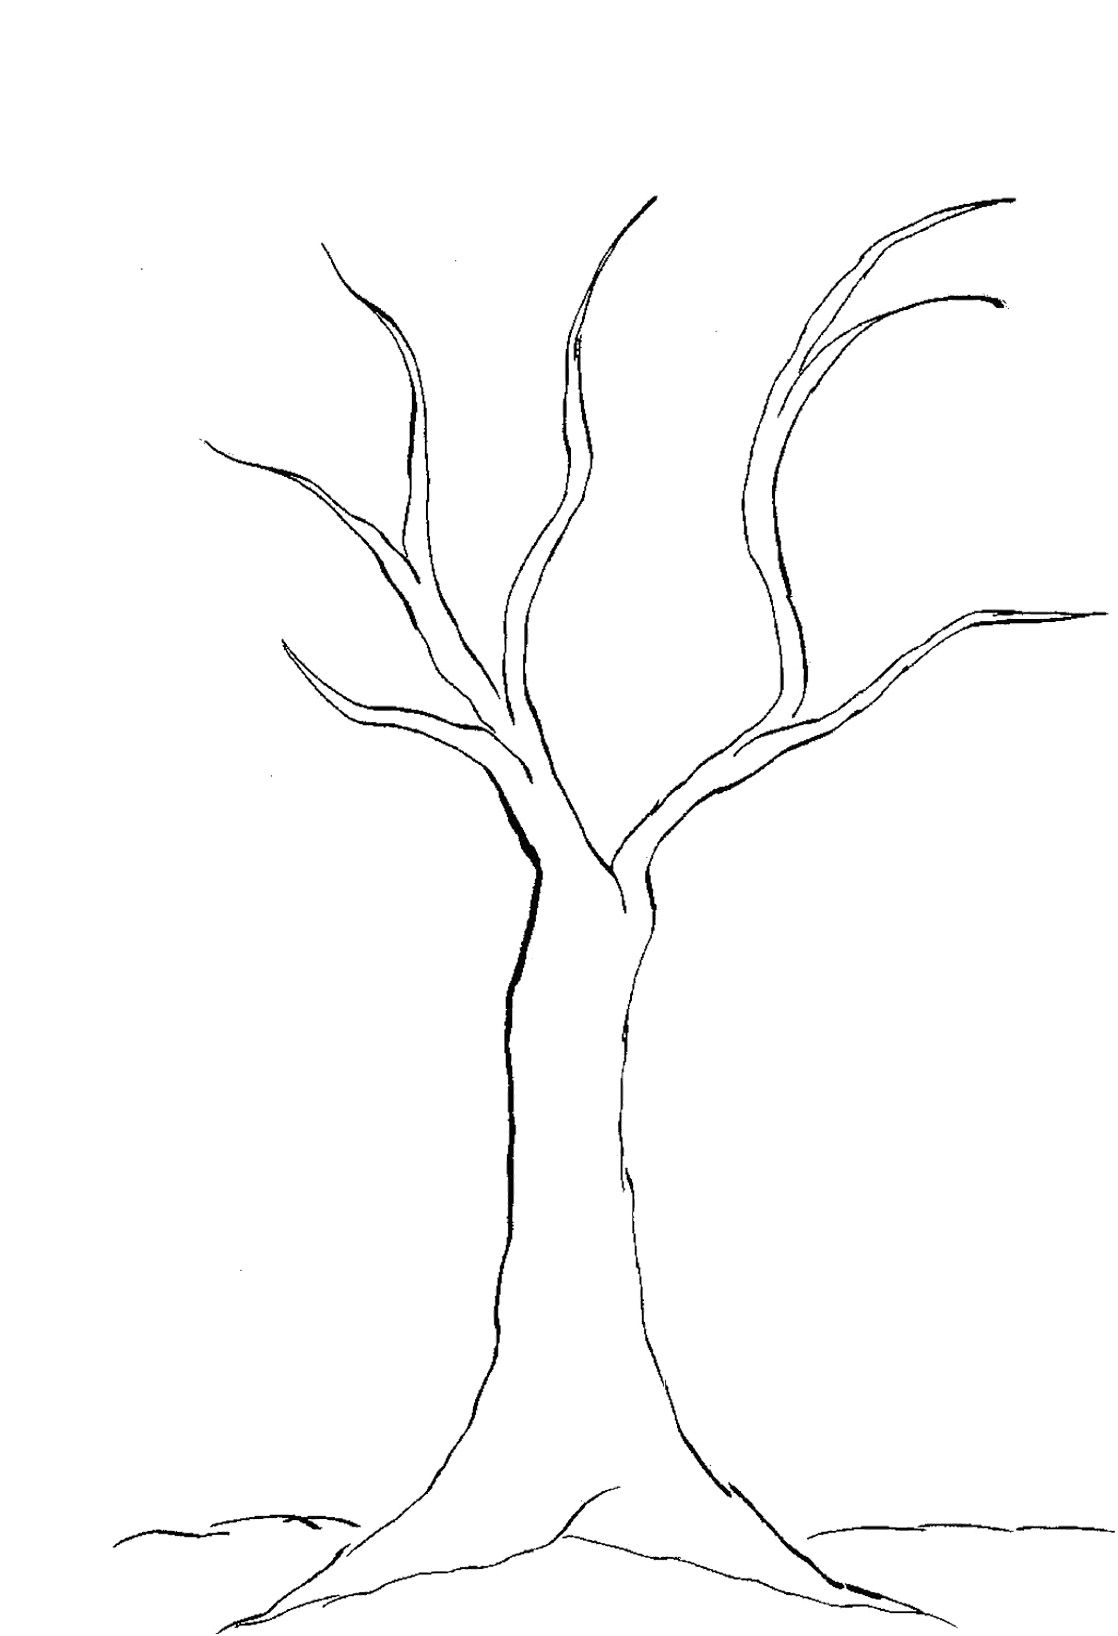 Picture Of A Bare Tree To Color | Free Coloring Pages on Masivy World